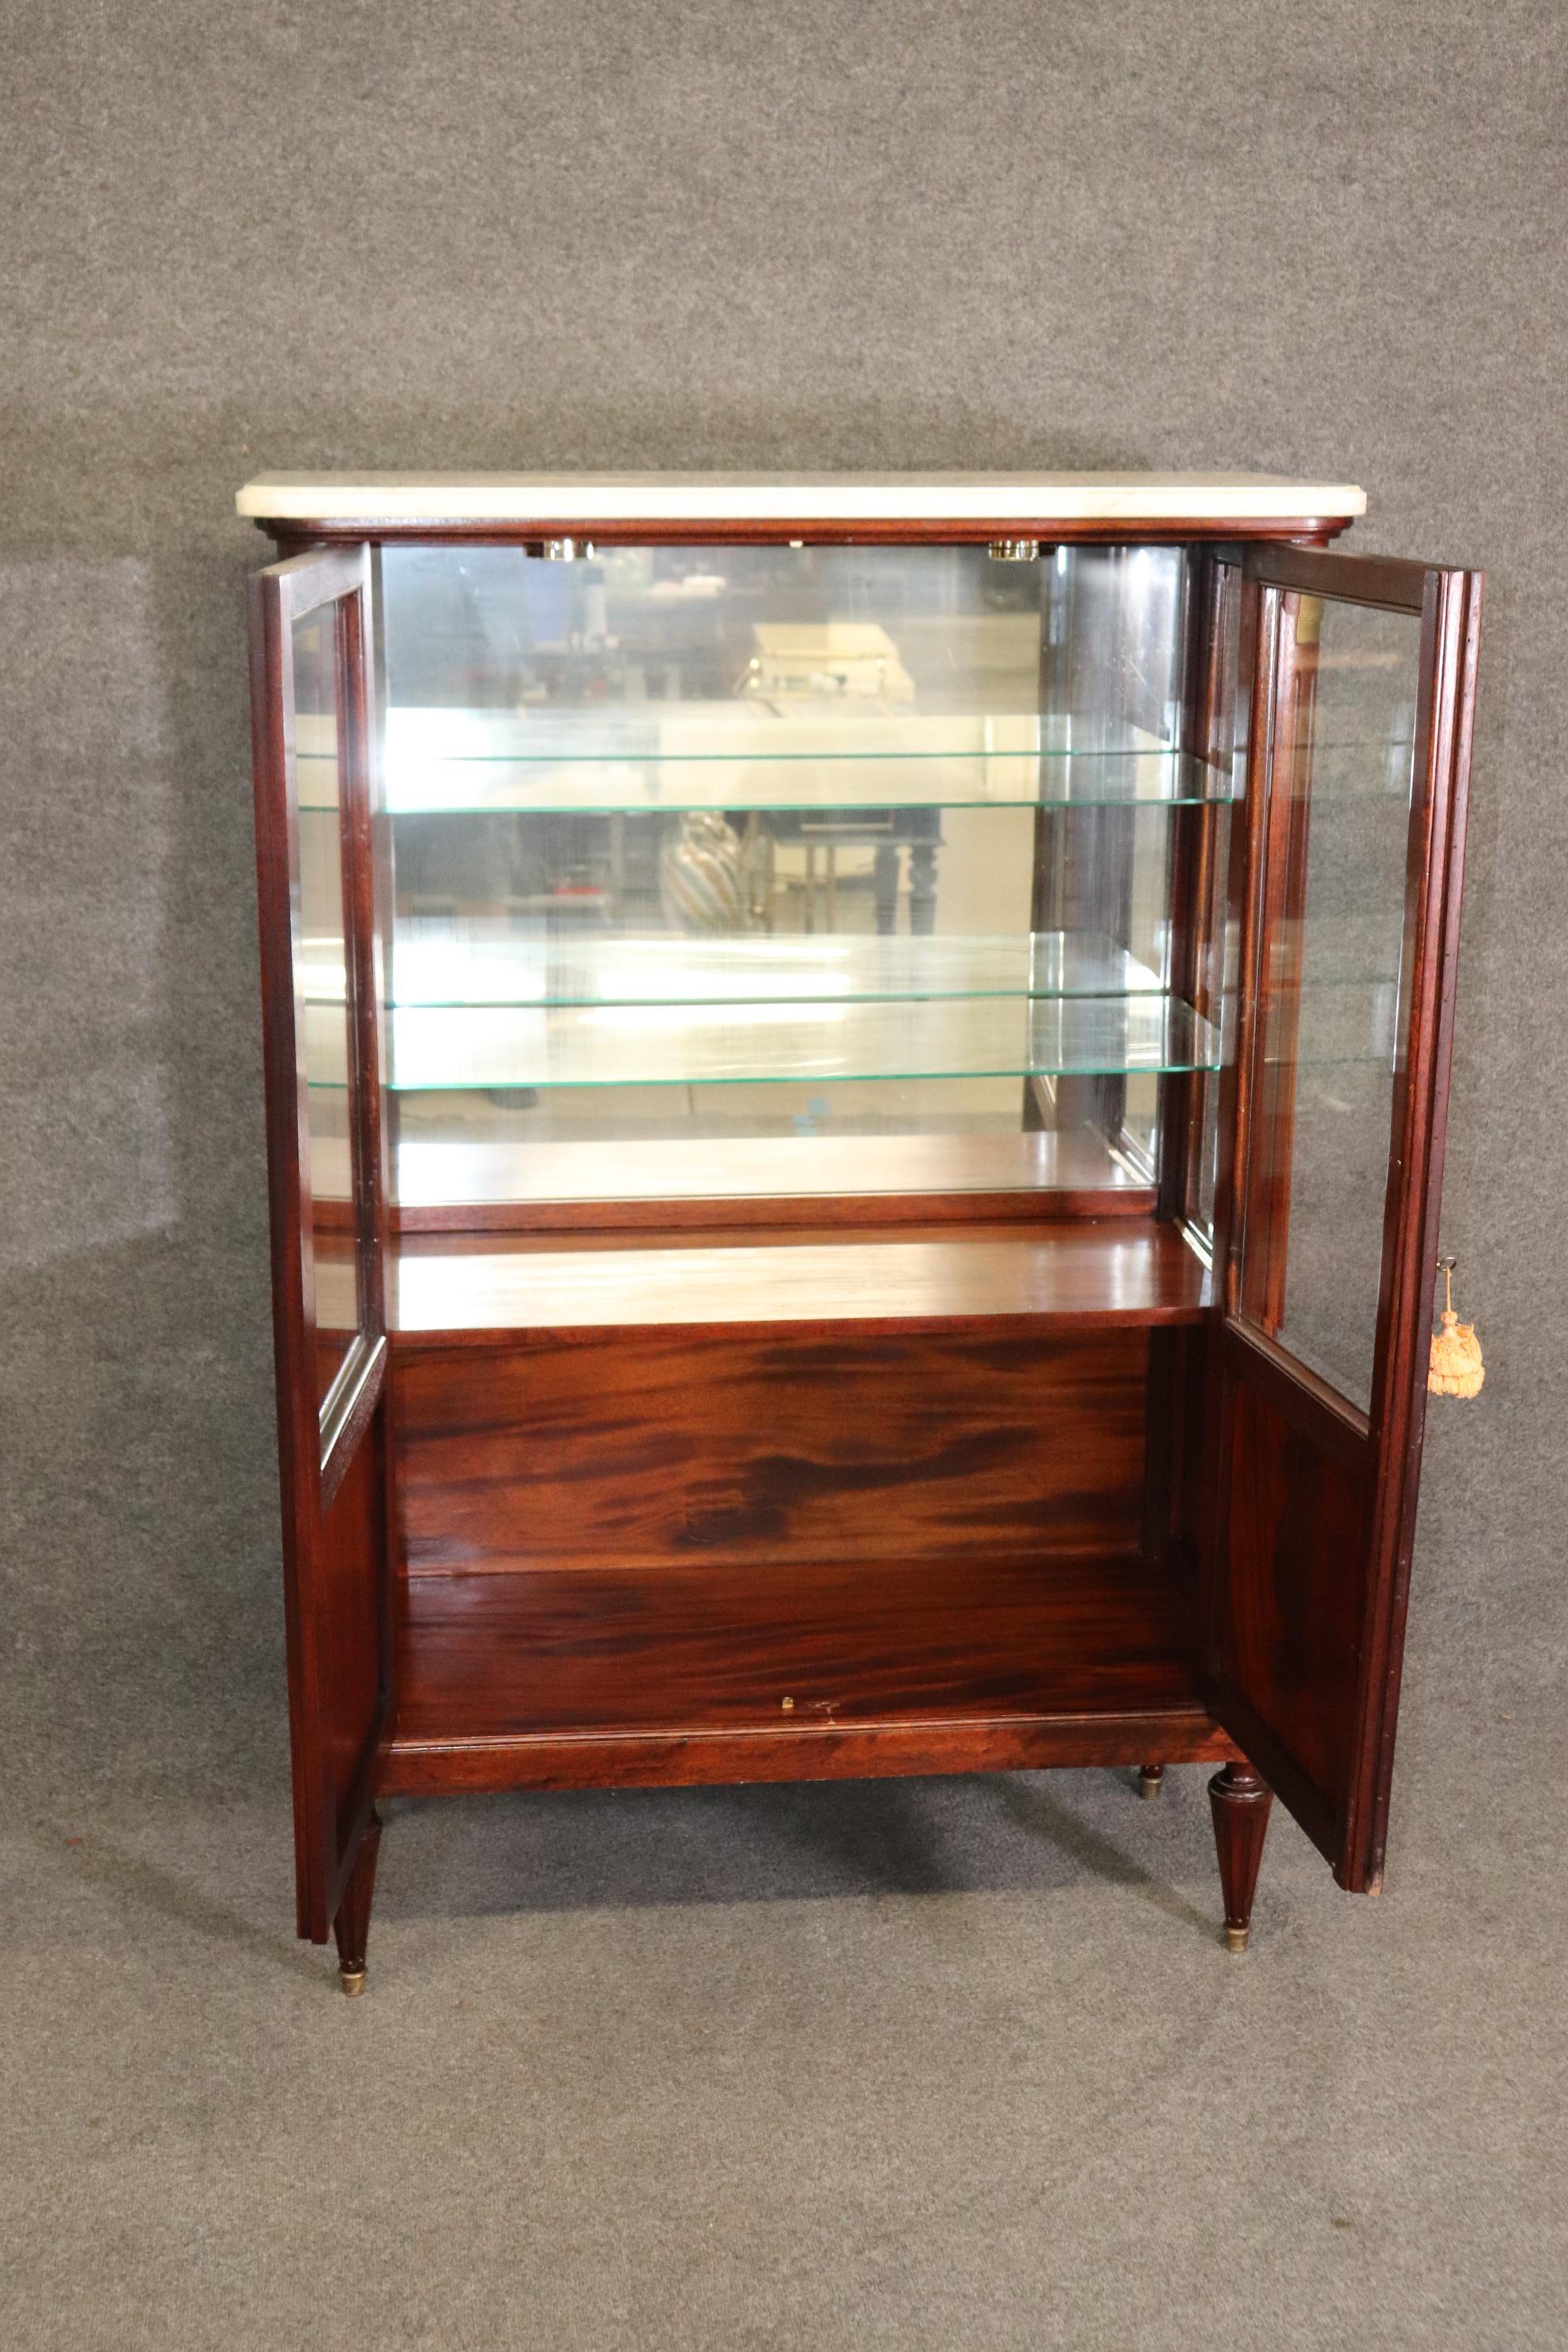 This is a great, smaller sized apartment style flame mahogany lighted vitrine or china cabinet. It has beautiful flame mahogany and a nice white marble top and brass accents. The cabinet dates to the 1940s and measures 60 tall x 41.25 wide x 18